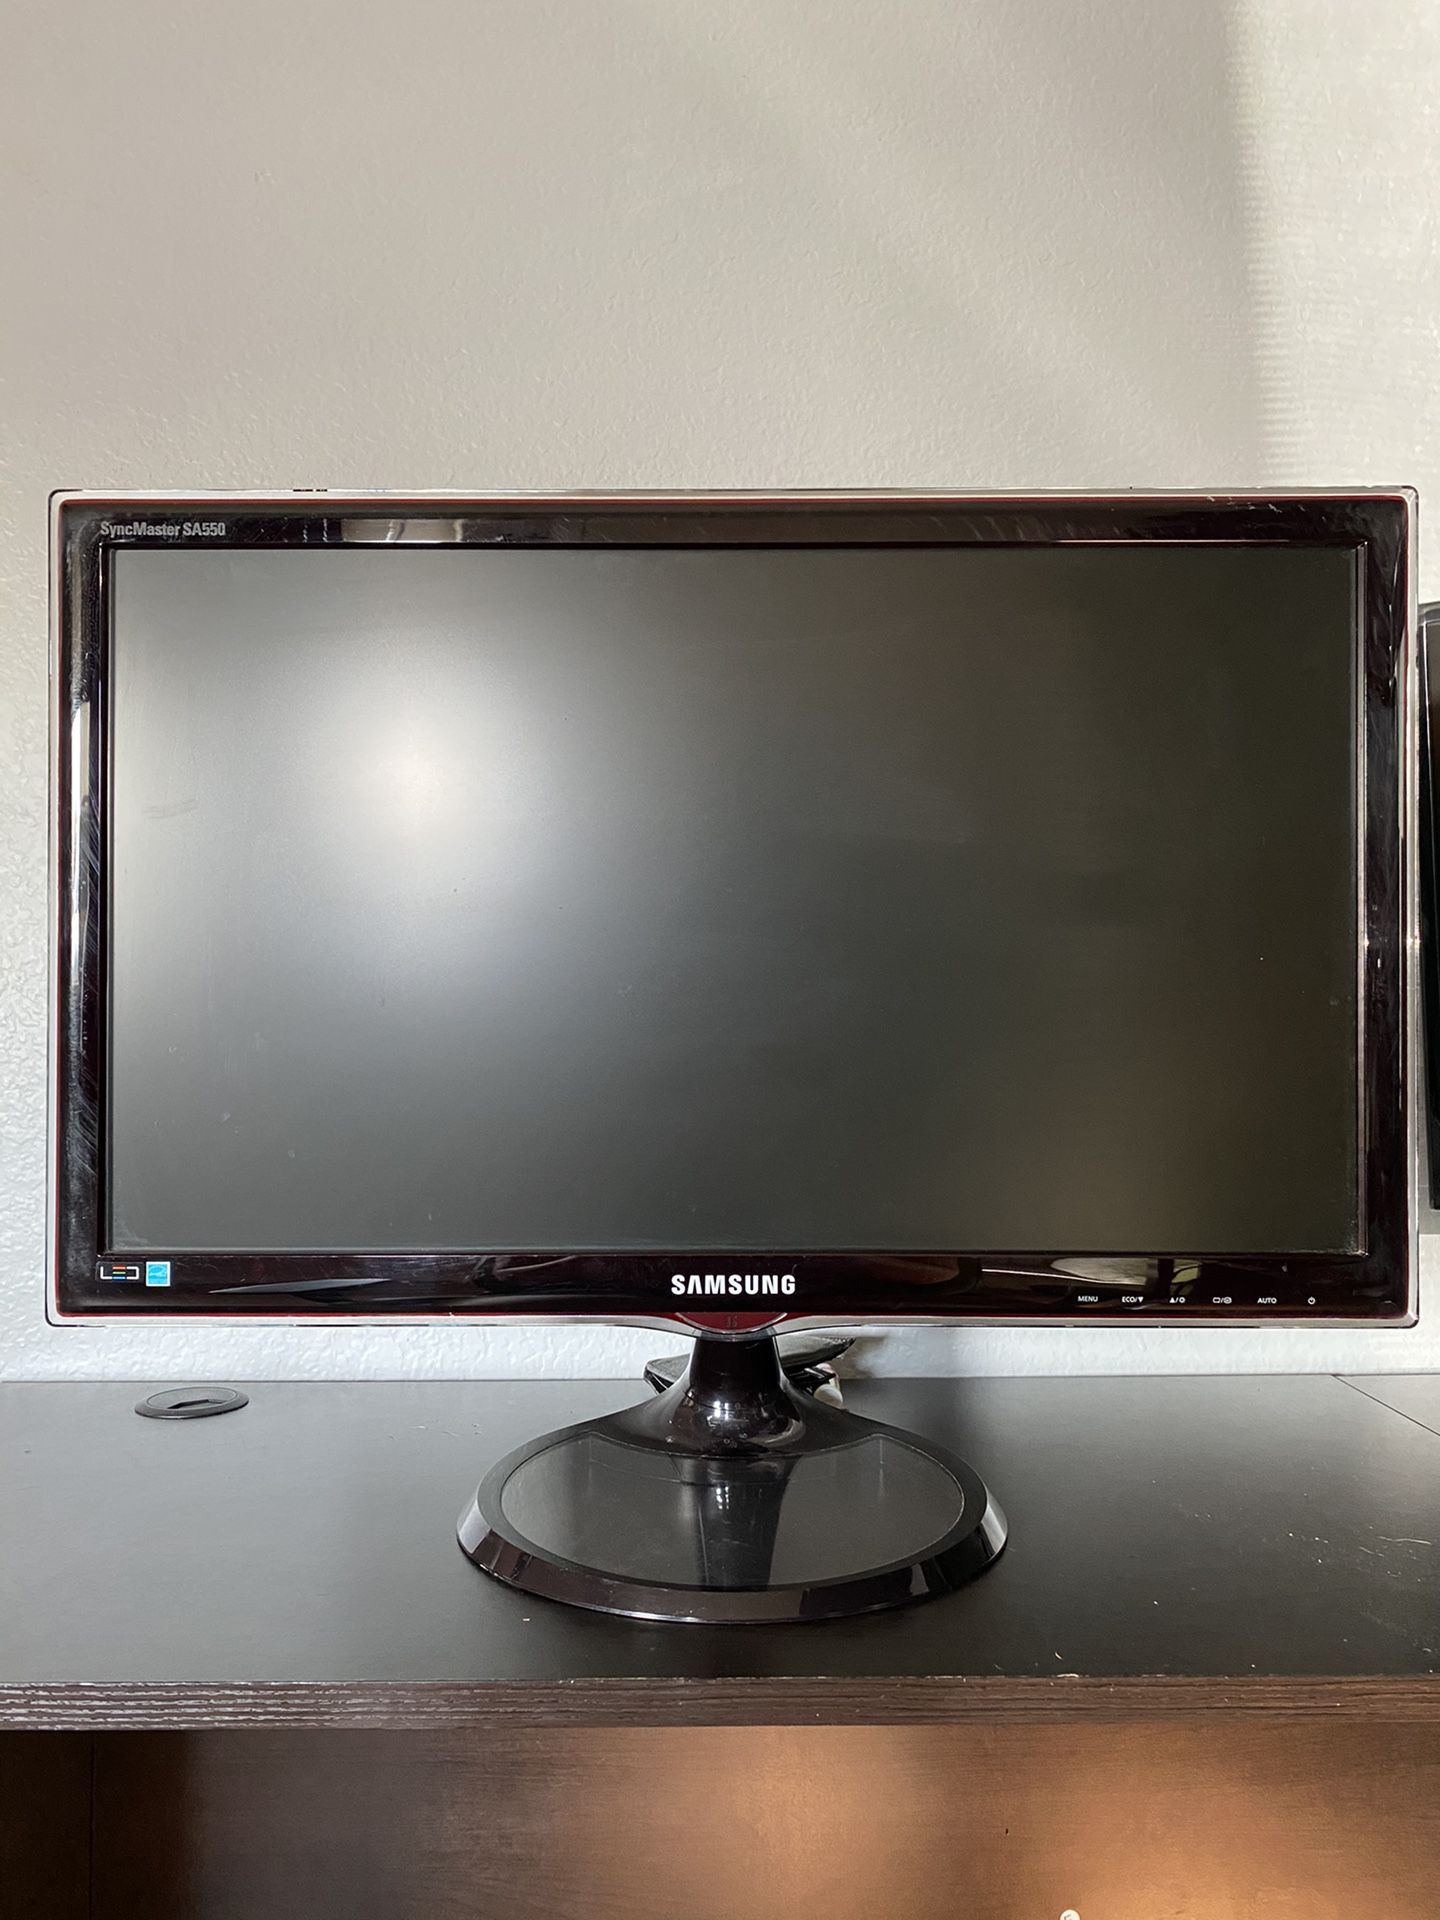 23” Samsung led lcd monitor Model #S23A550H